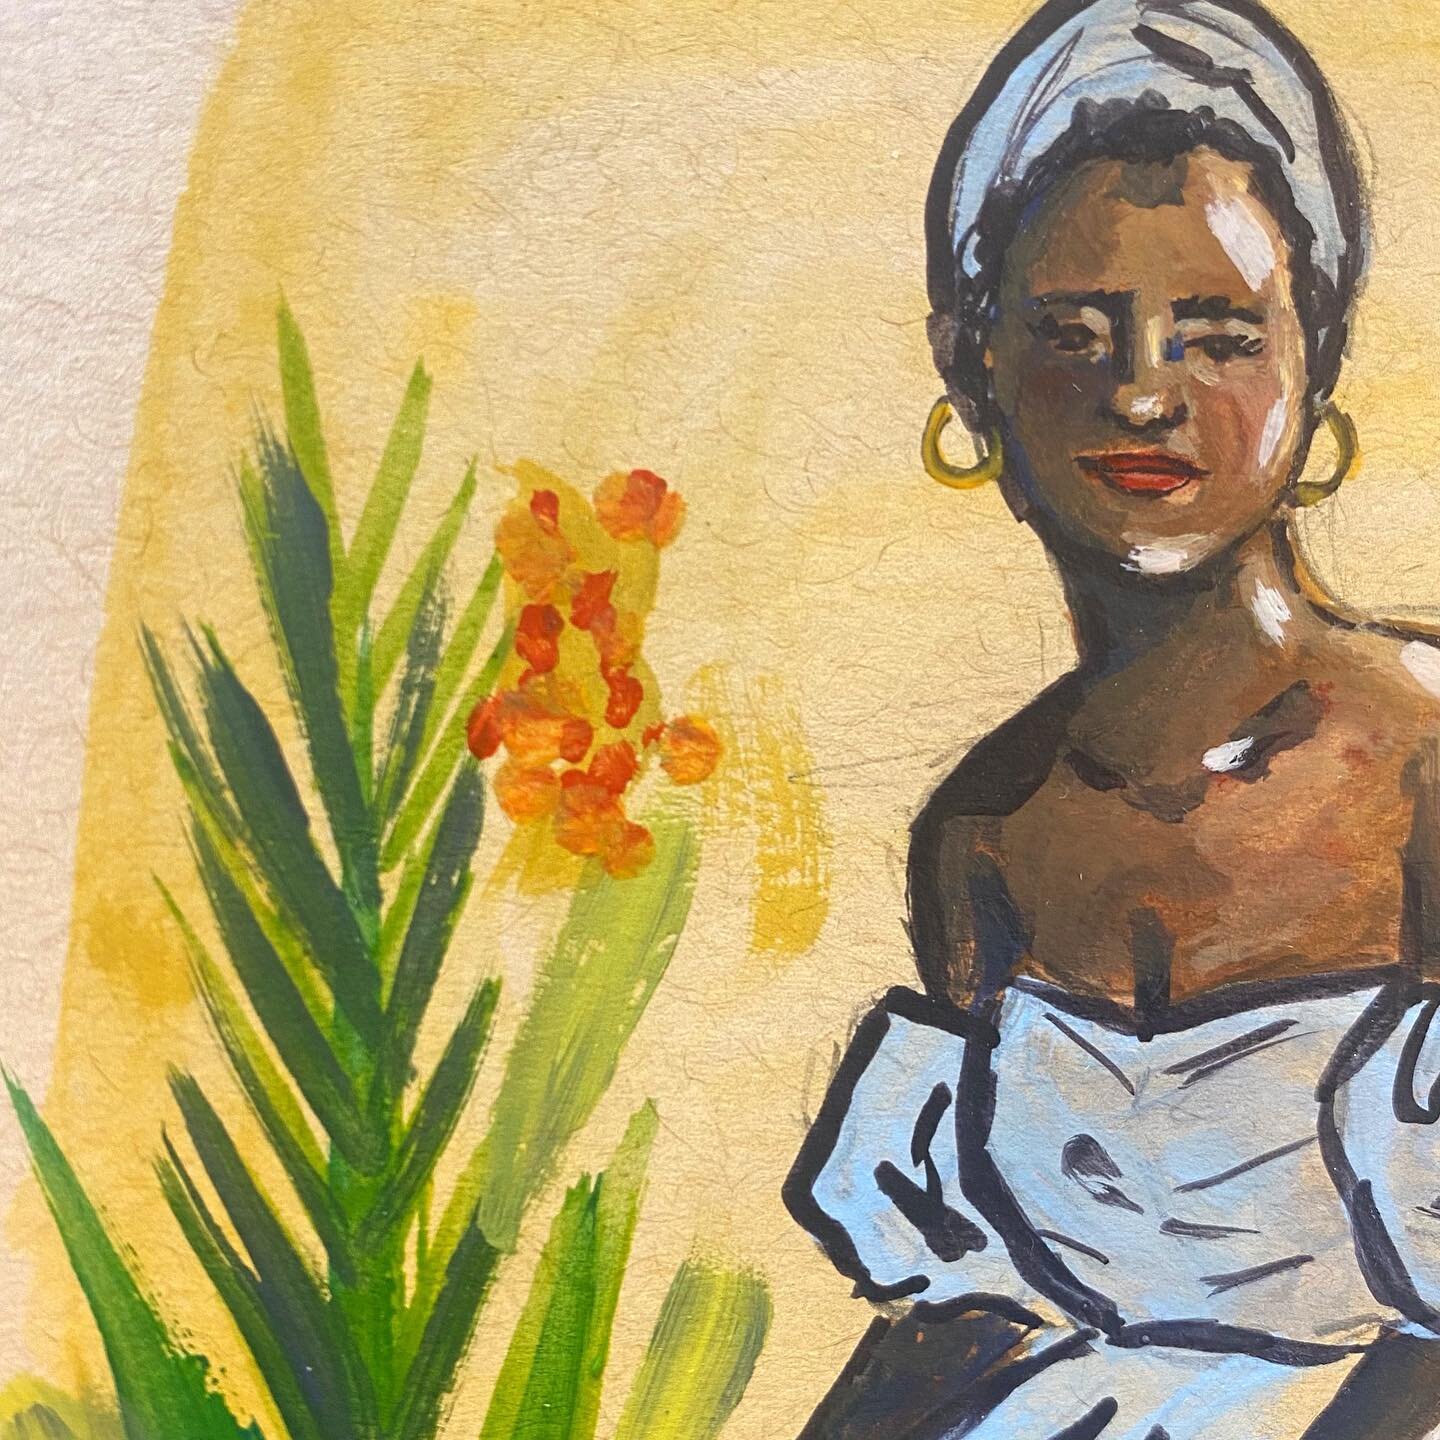 Pedazos de Puerto Rico: A series of paintings based off old family photos, cultural images and objects representing what I love about home. 🇵🇷 

Come see the full collection along with other amazing artists and their work on October 1st at 6pm at t